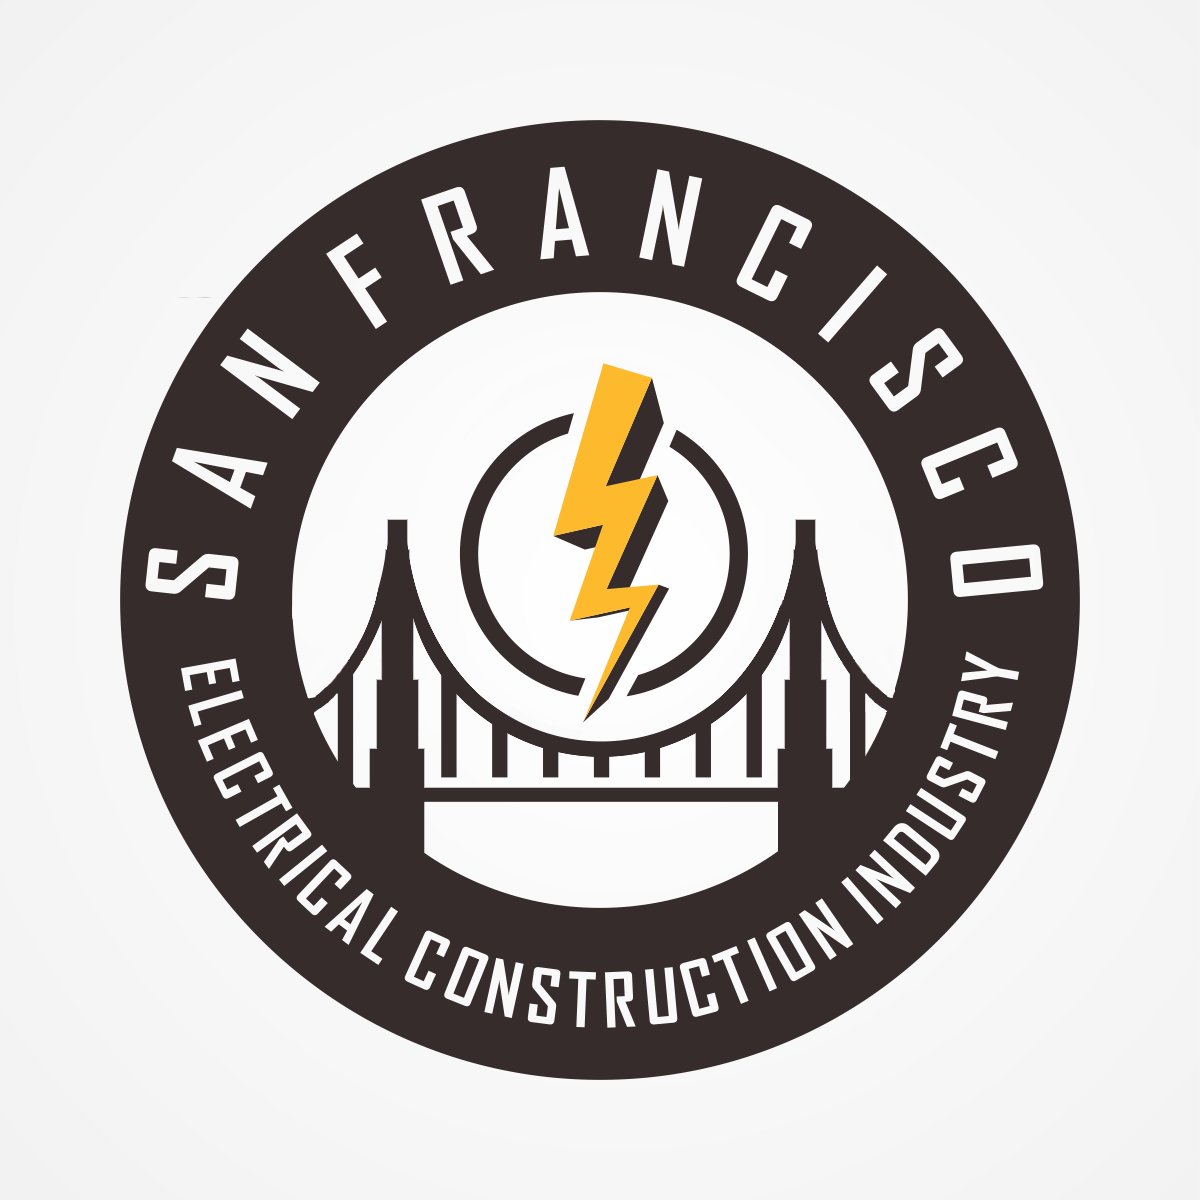 SFECI is the voice of SF's organized electrical workers and the contractors that employ them, advocating for the communities in which they live, work, and play.